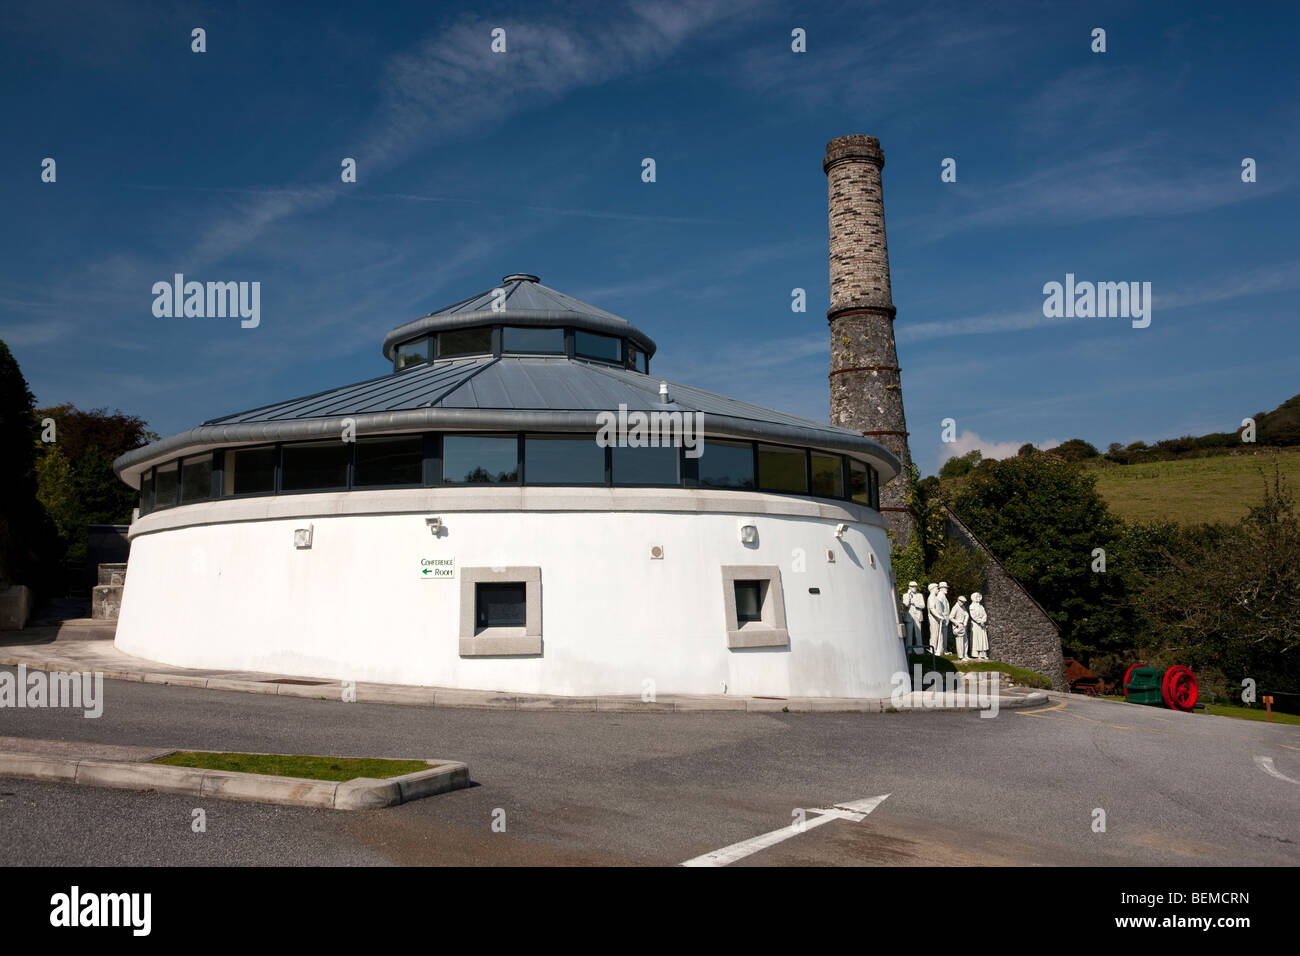 China clay industry heritage centre near St Austell, Cornwall, UK Stock Photo